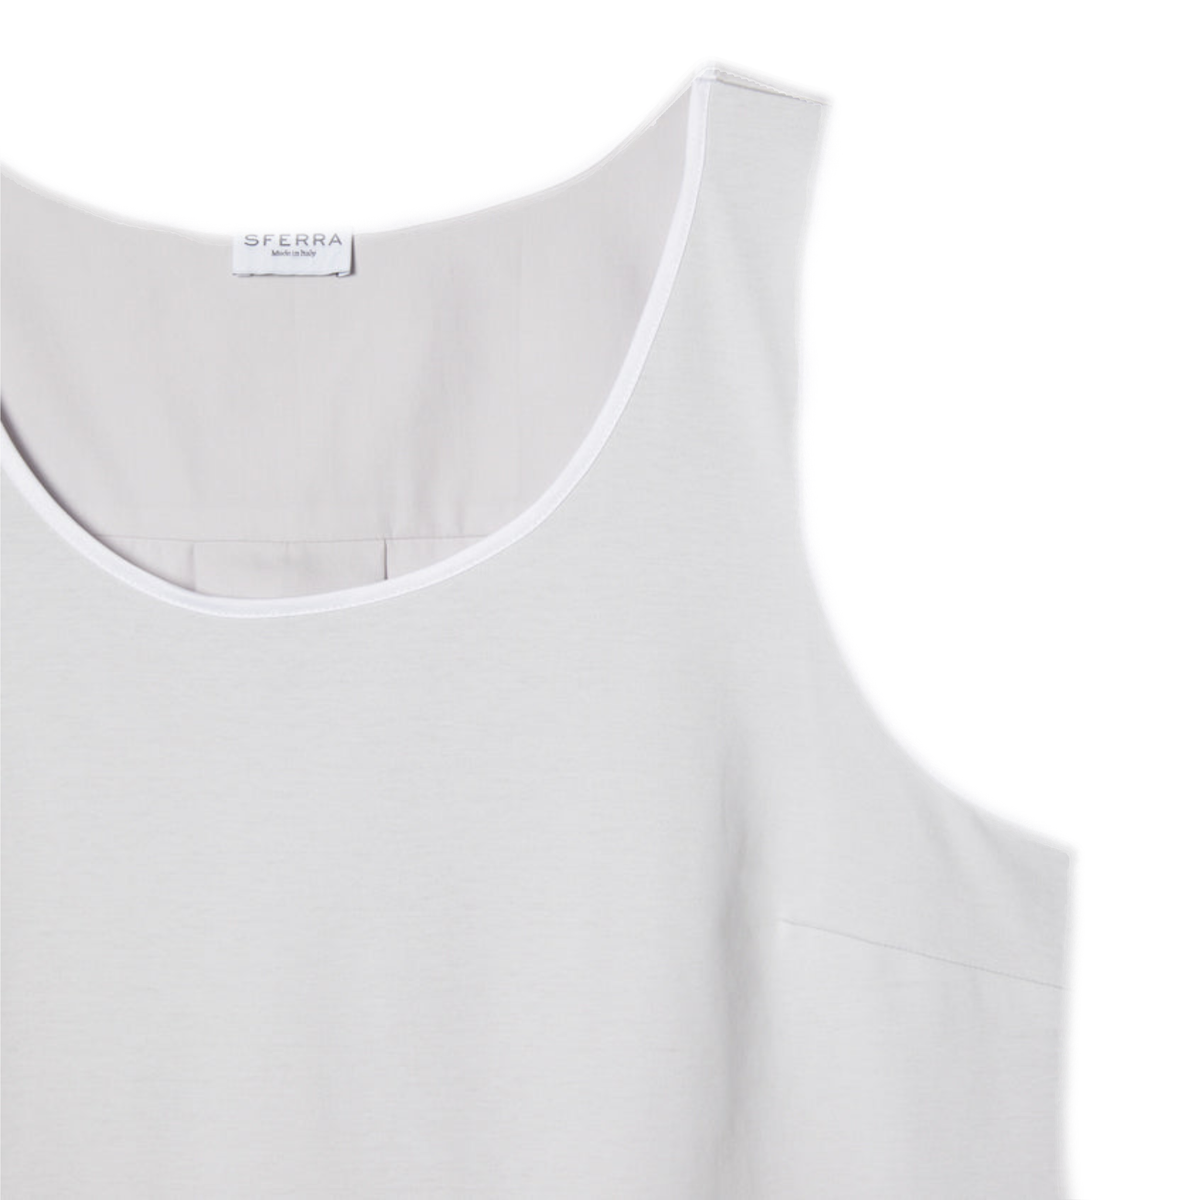 Corner View of Tin Sferra Caricia Swing Tank Top against a white background